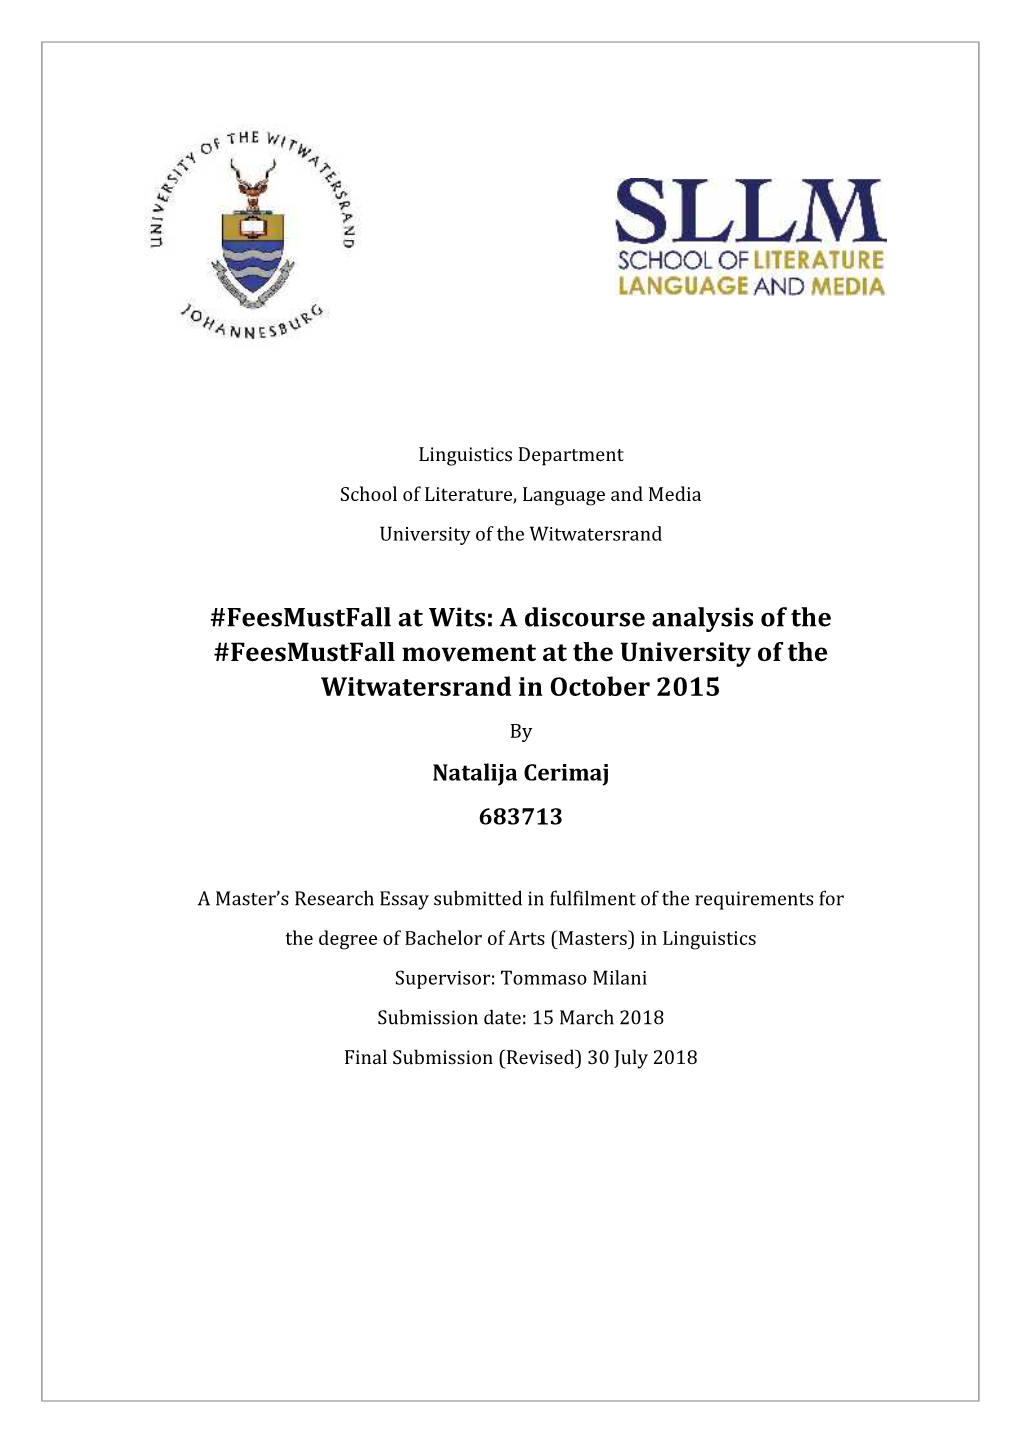 Feesmustfall at Wits: a Discourse Analysis of the #Feesmustfall Movement at the University of the Witwatersrand in October 2015